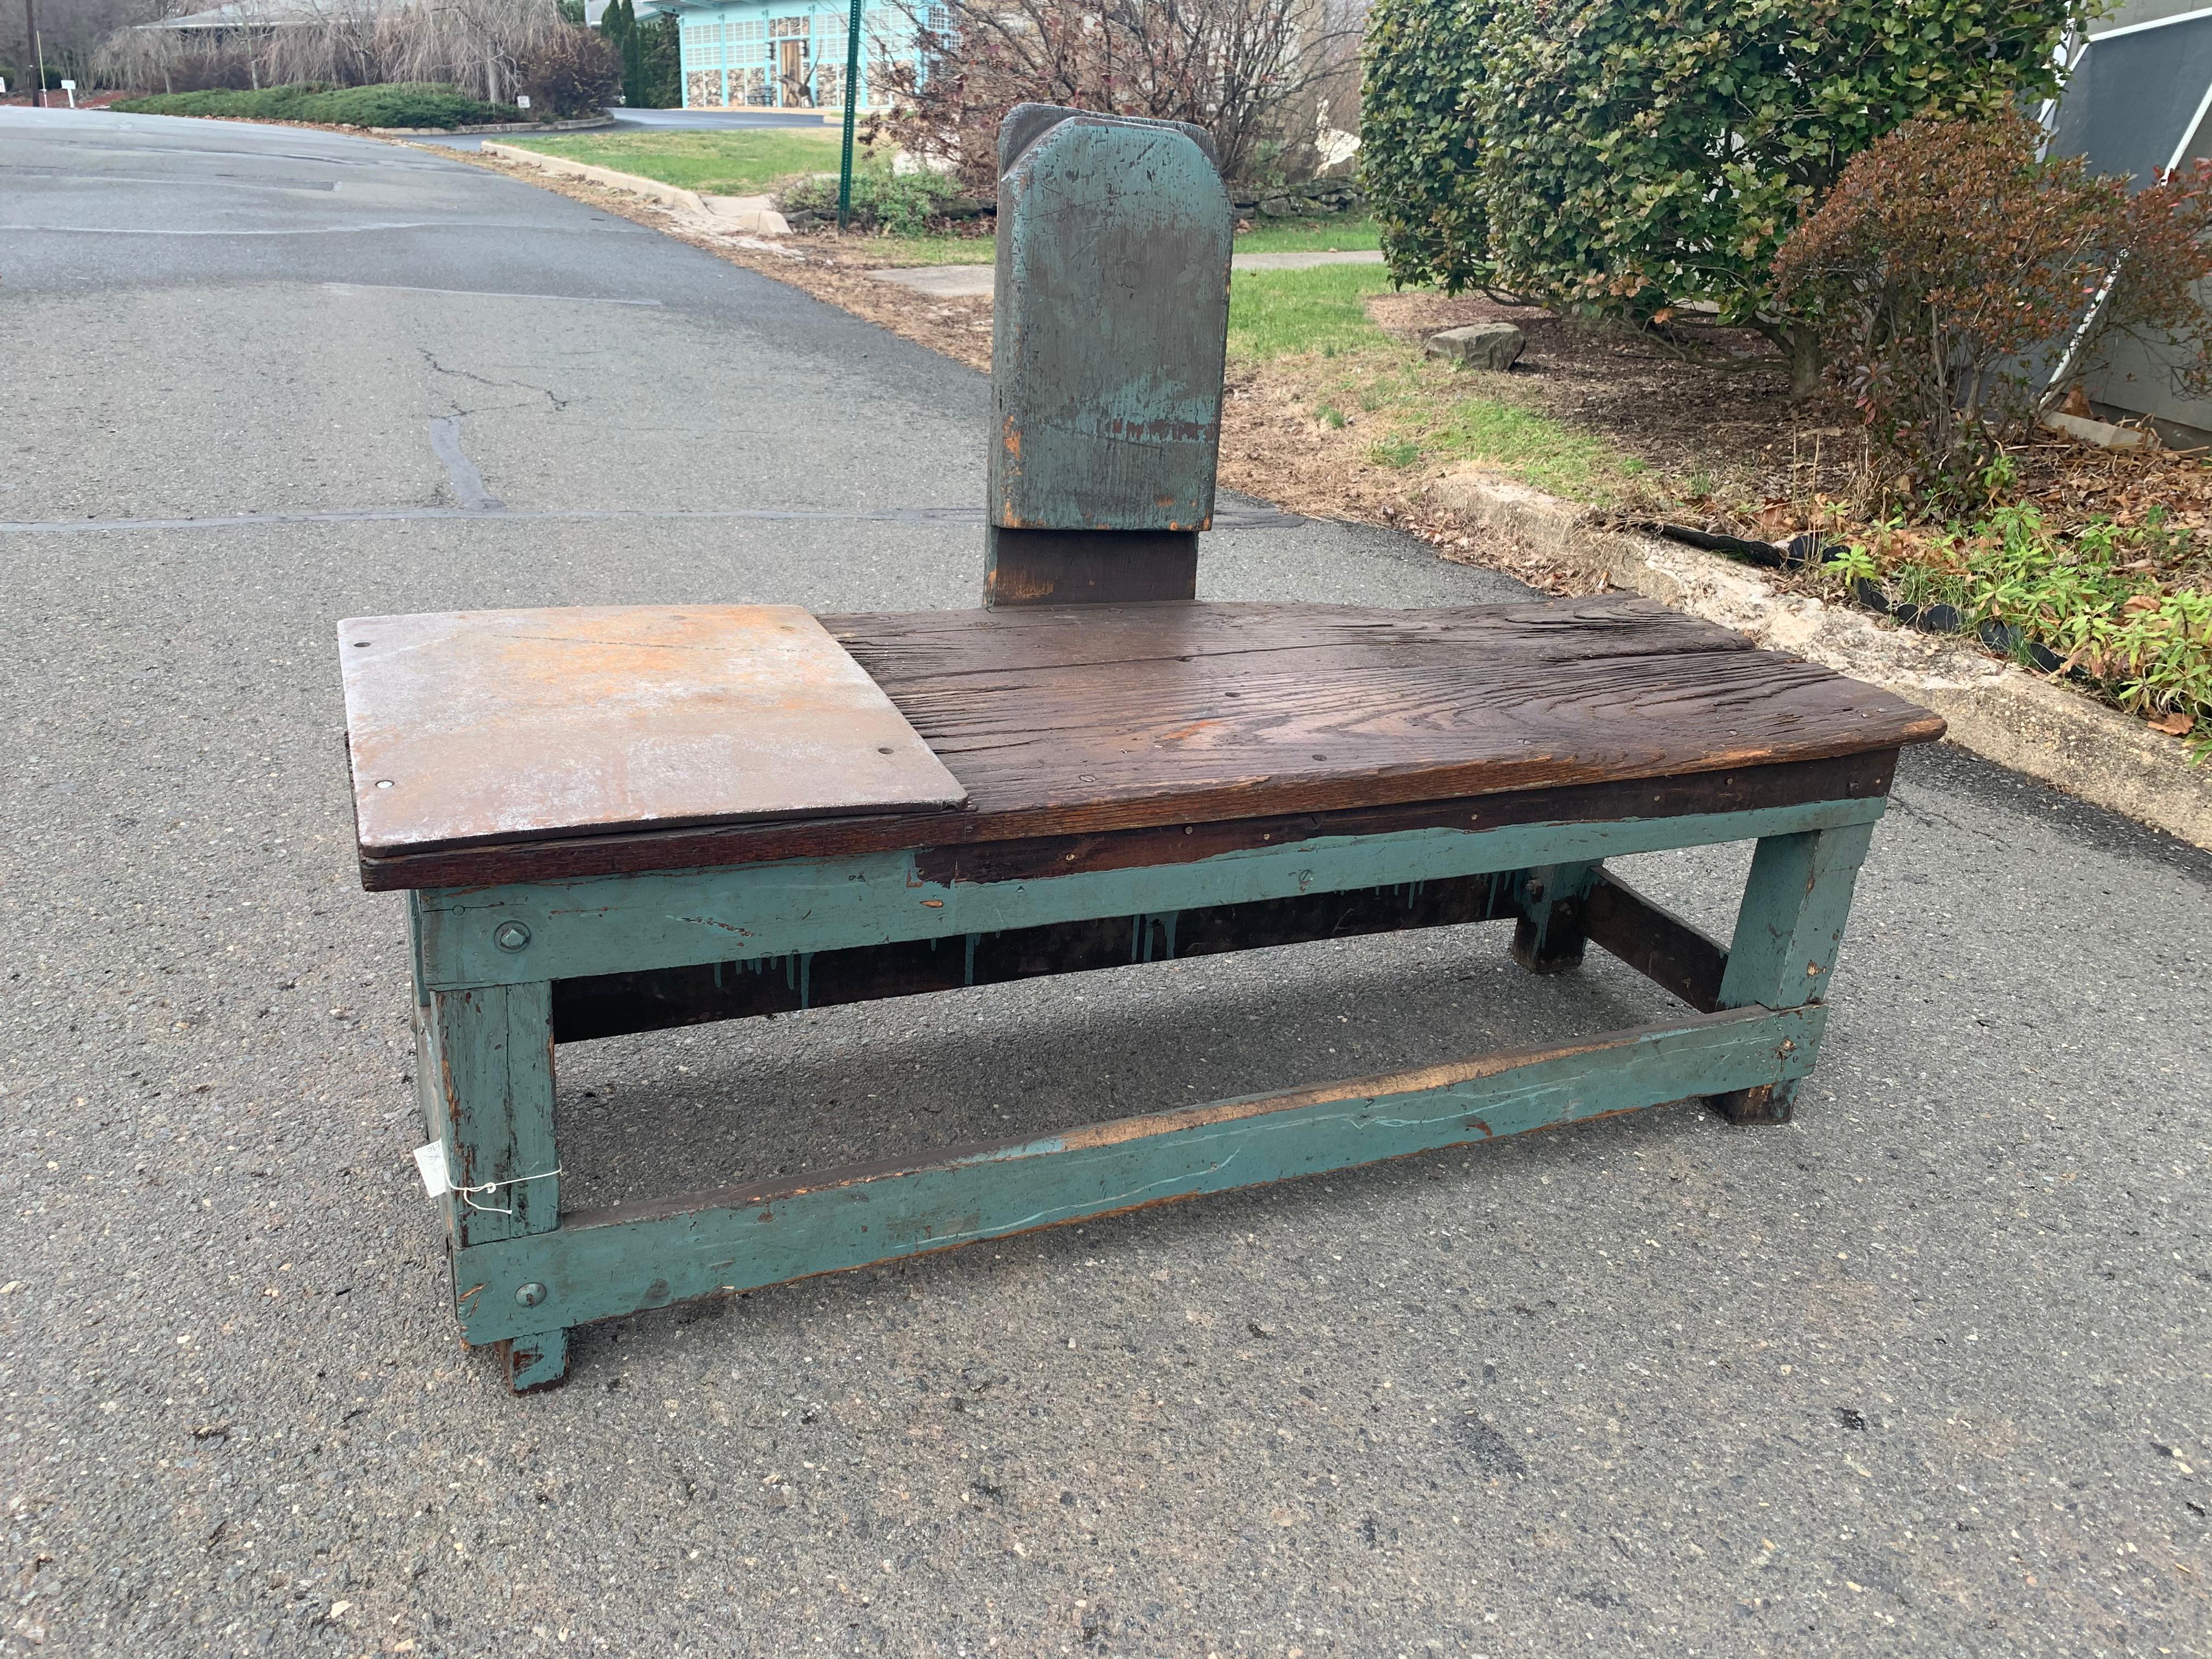 Cool rustic industrial one of a kind handmade work bench having distressed painted turquoise base, natural stained wood seat with copper panel, and wood and metal seat back.
Measures: 37.5 H with back.